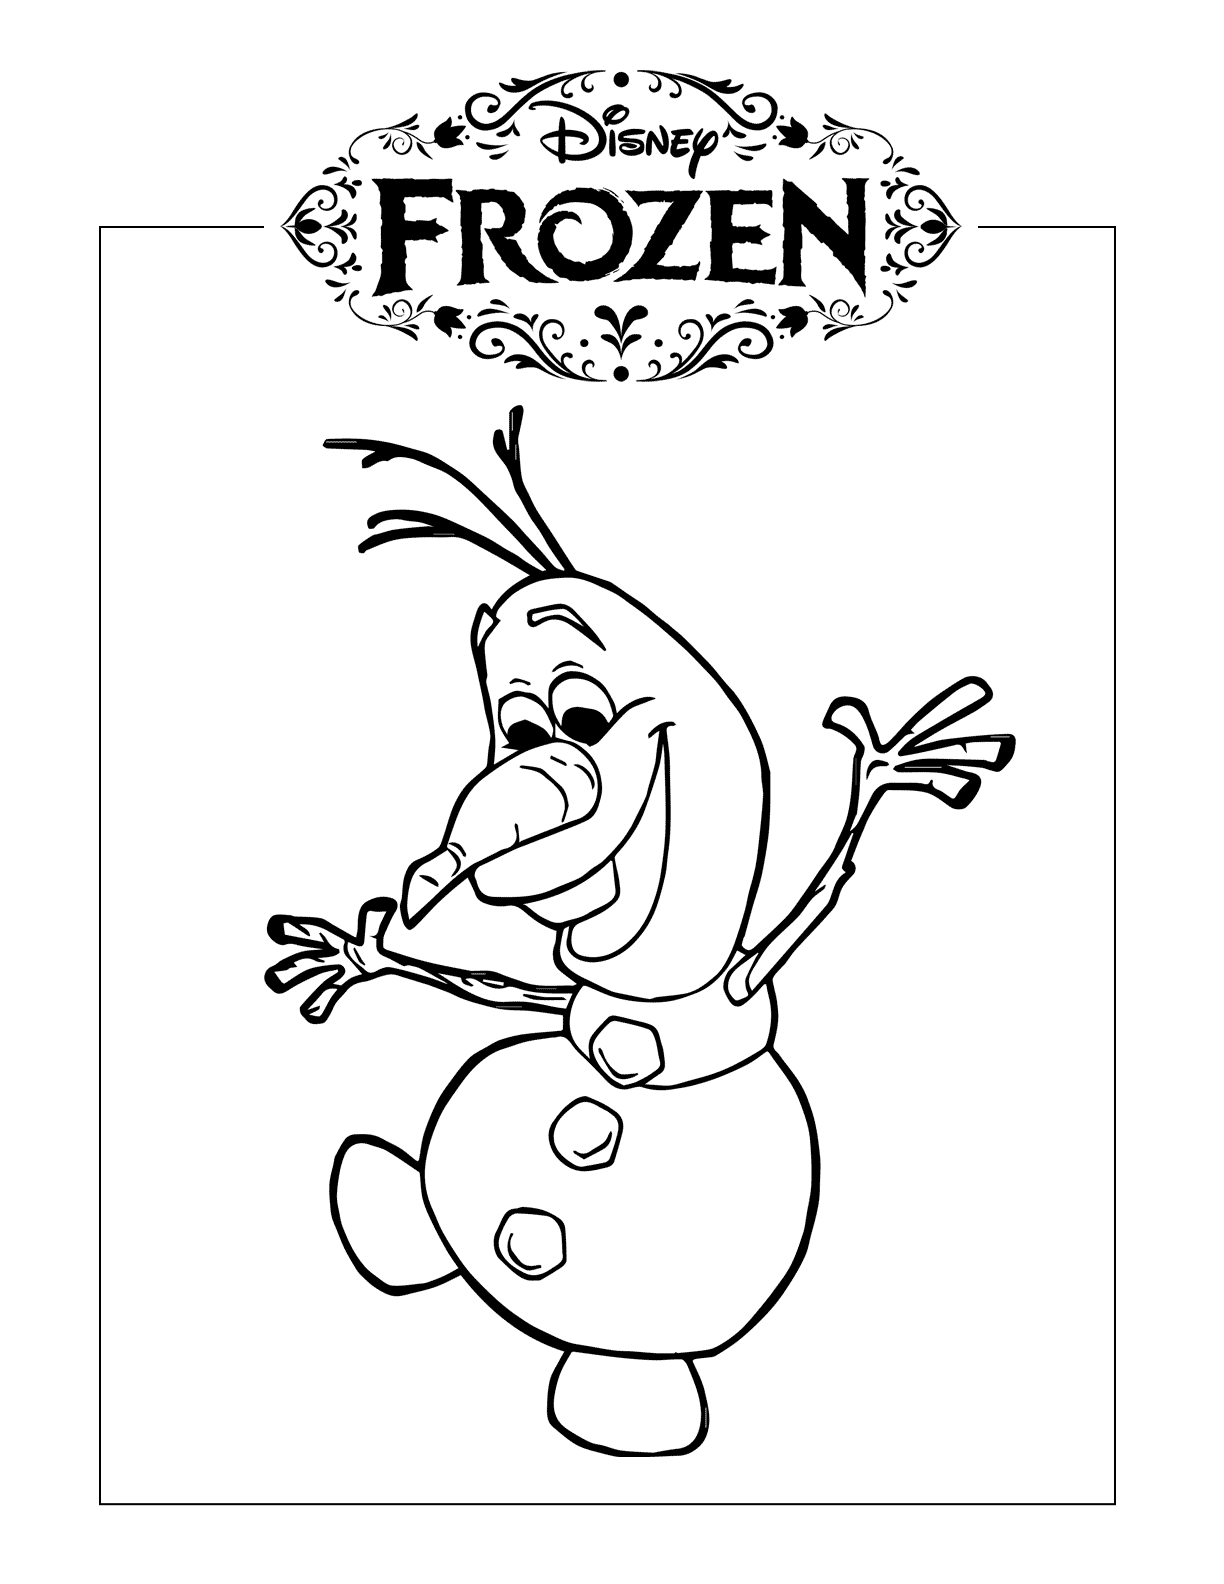 Olaf Printable Coloring Pages